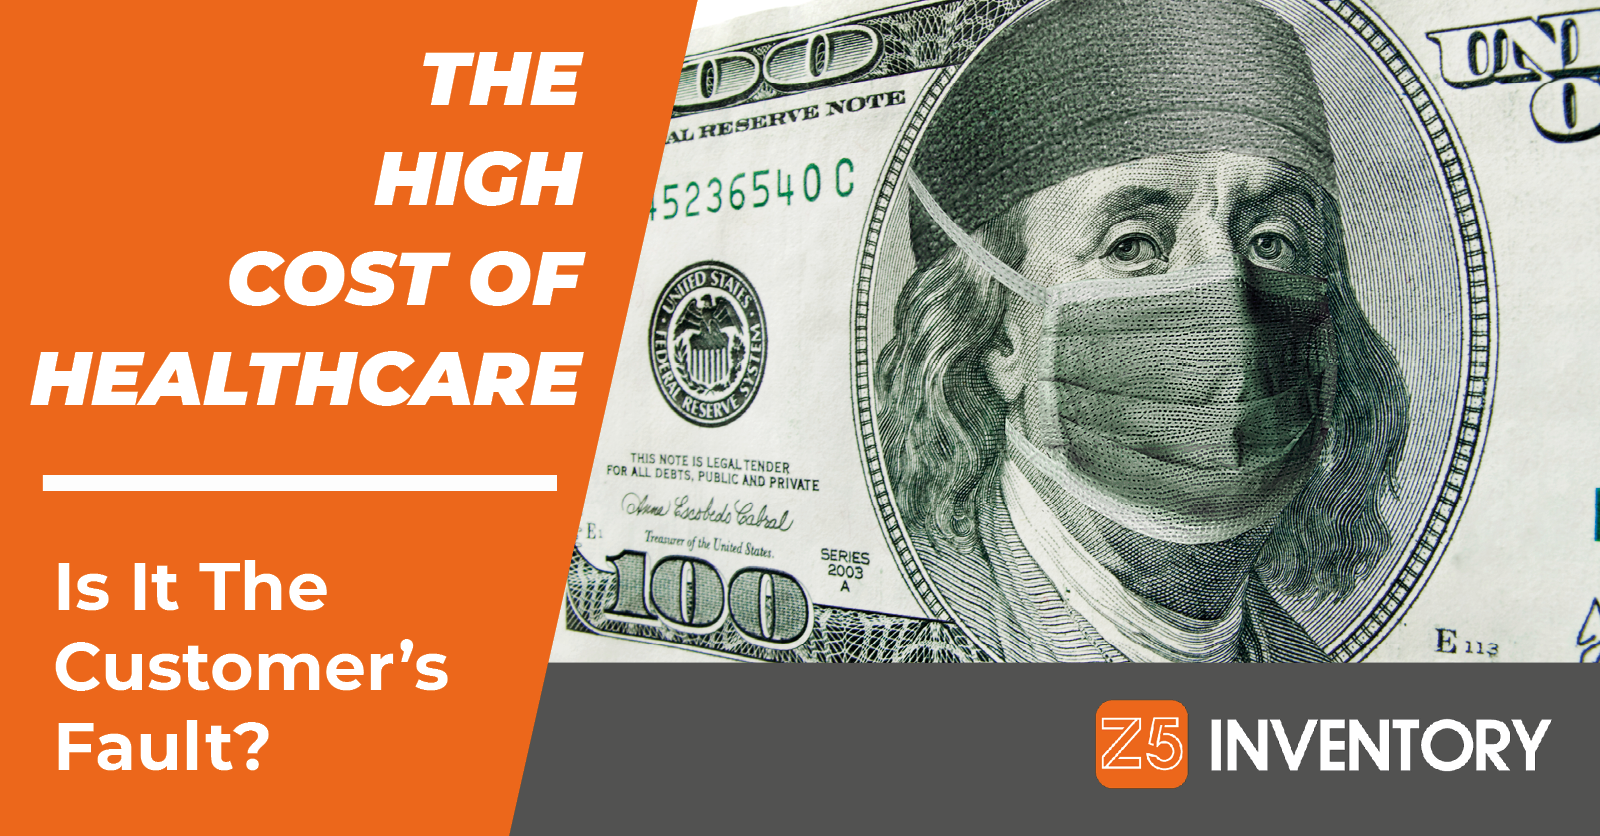 The cost of healthcare is high because of inefficiency and excess.